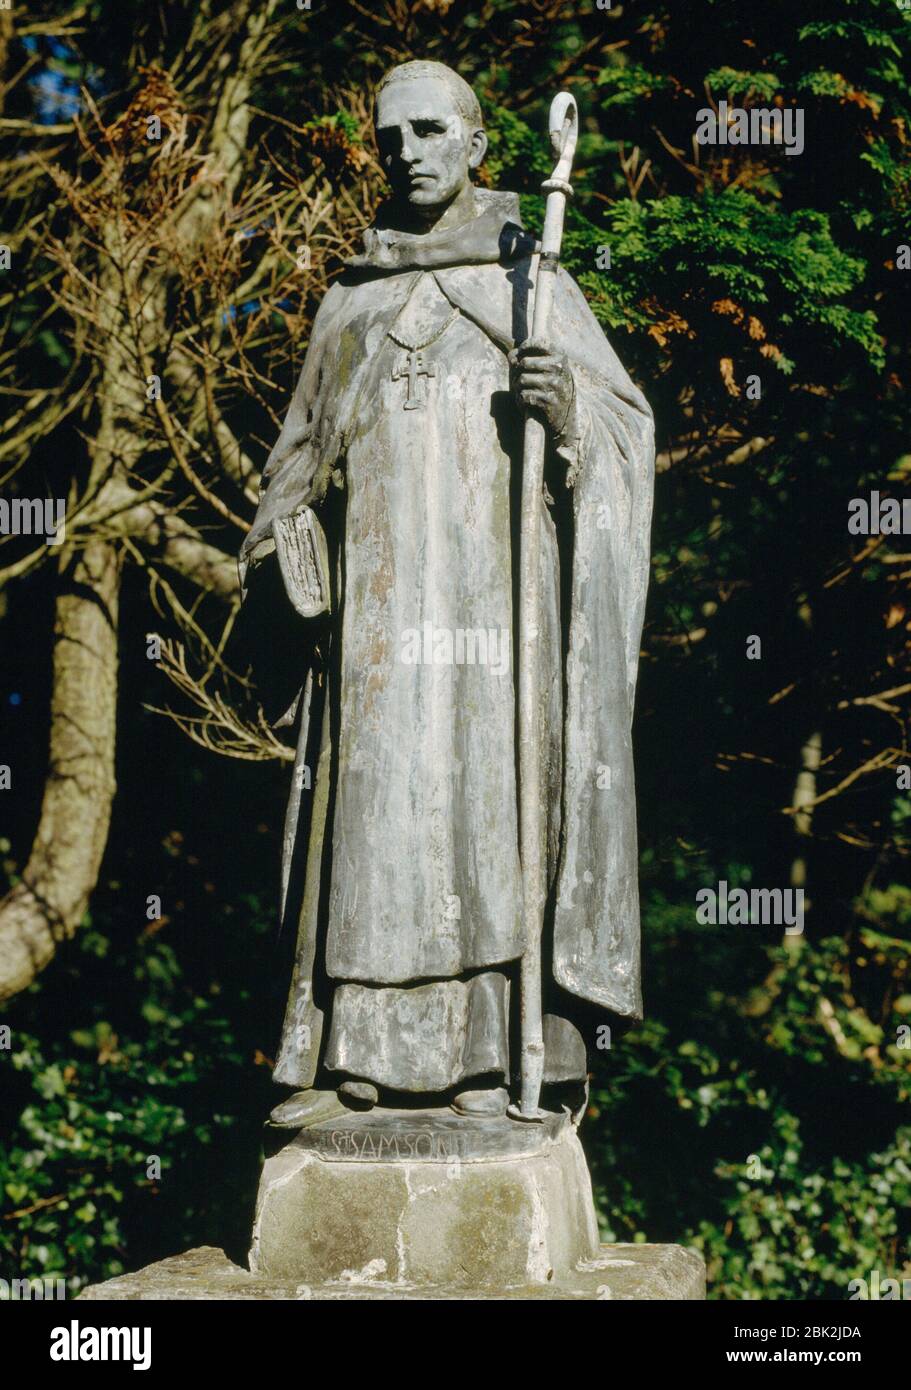 A C20th statue of St Samson, second Abbot of the C6th Celtic monastery on Caldey Island, Pembrokeshire, Wales, UK; patron of the whole island. Stock Photo